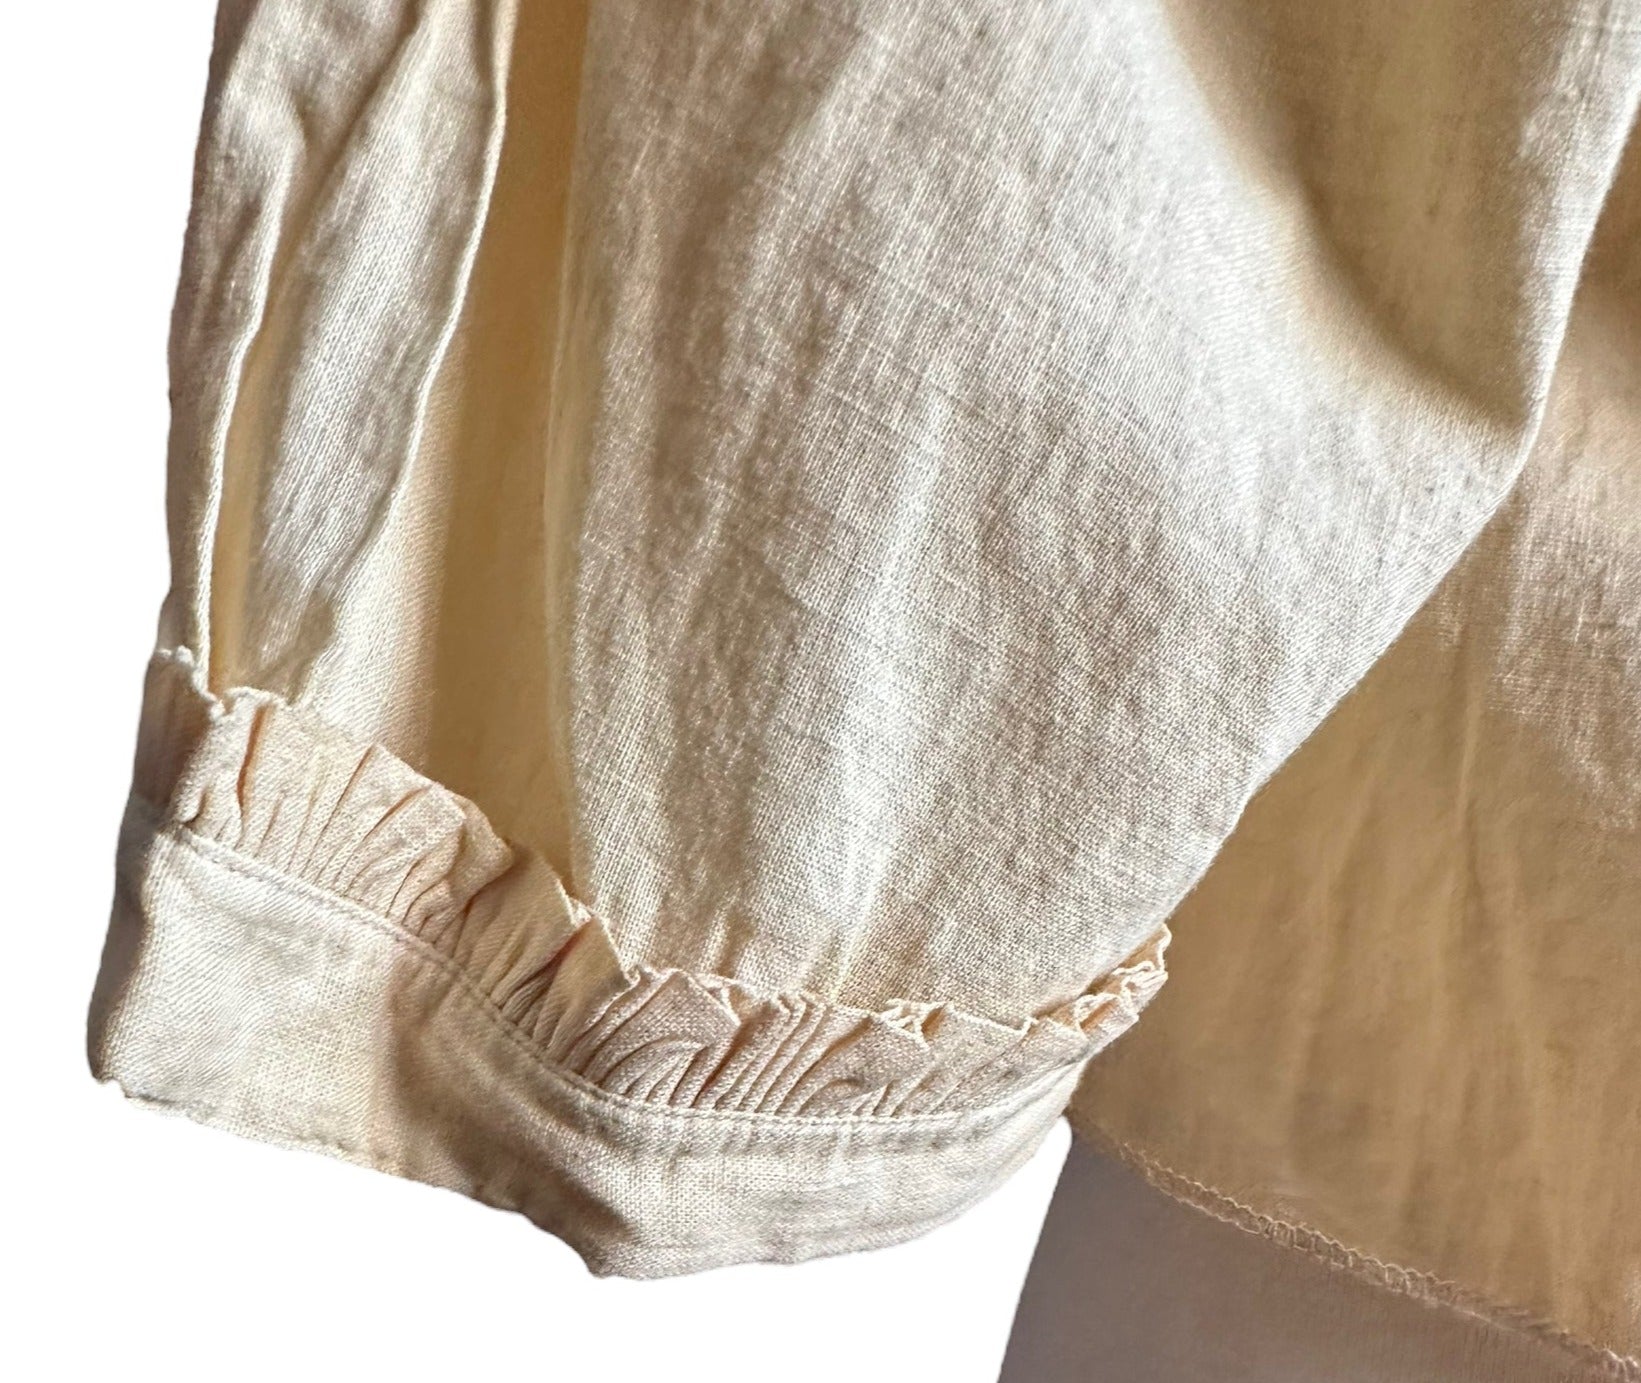 Close up of cuff Early 1900s Antique Linen Blouse | Seattle Antique Clothing | Barn Owl True Vintage